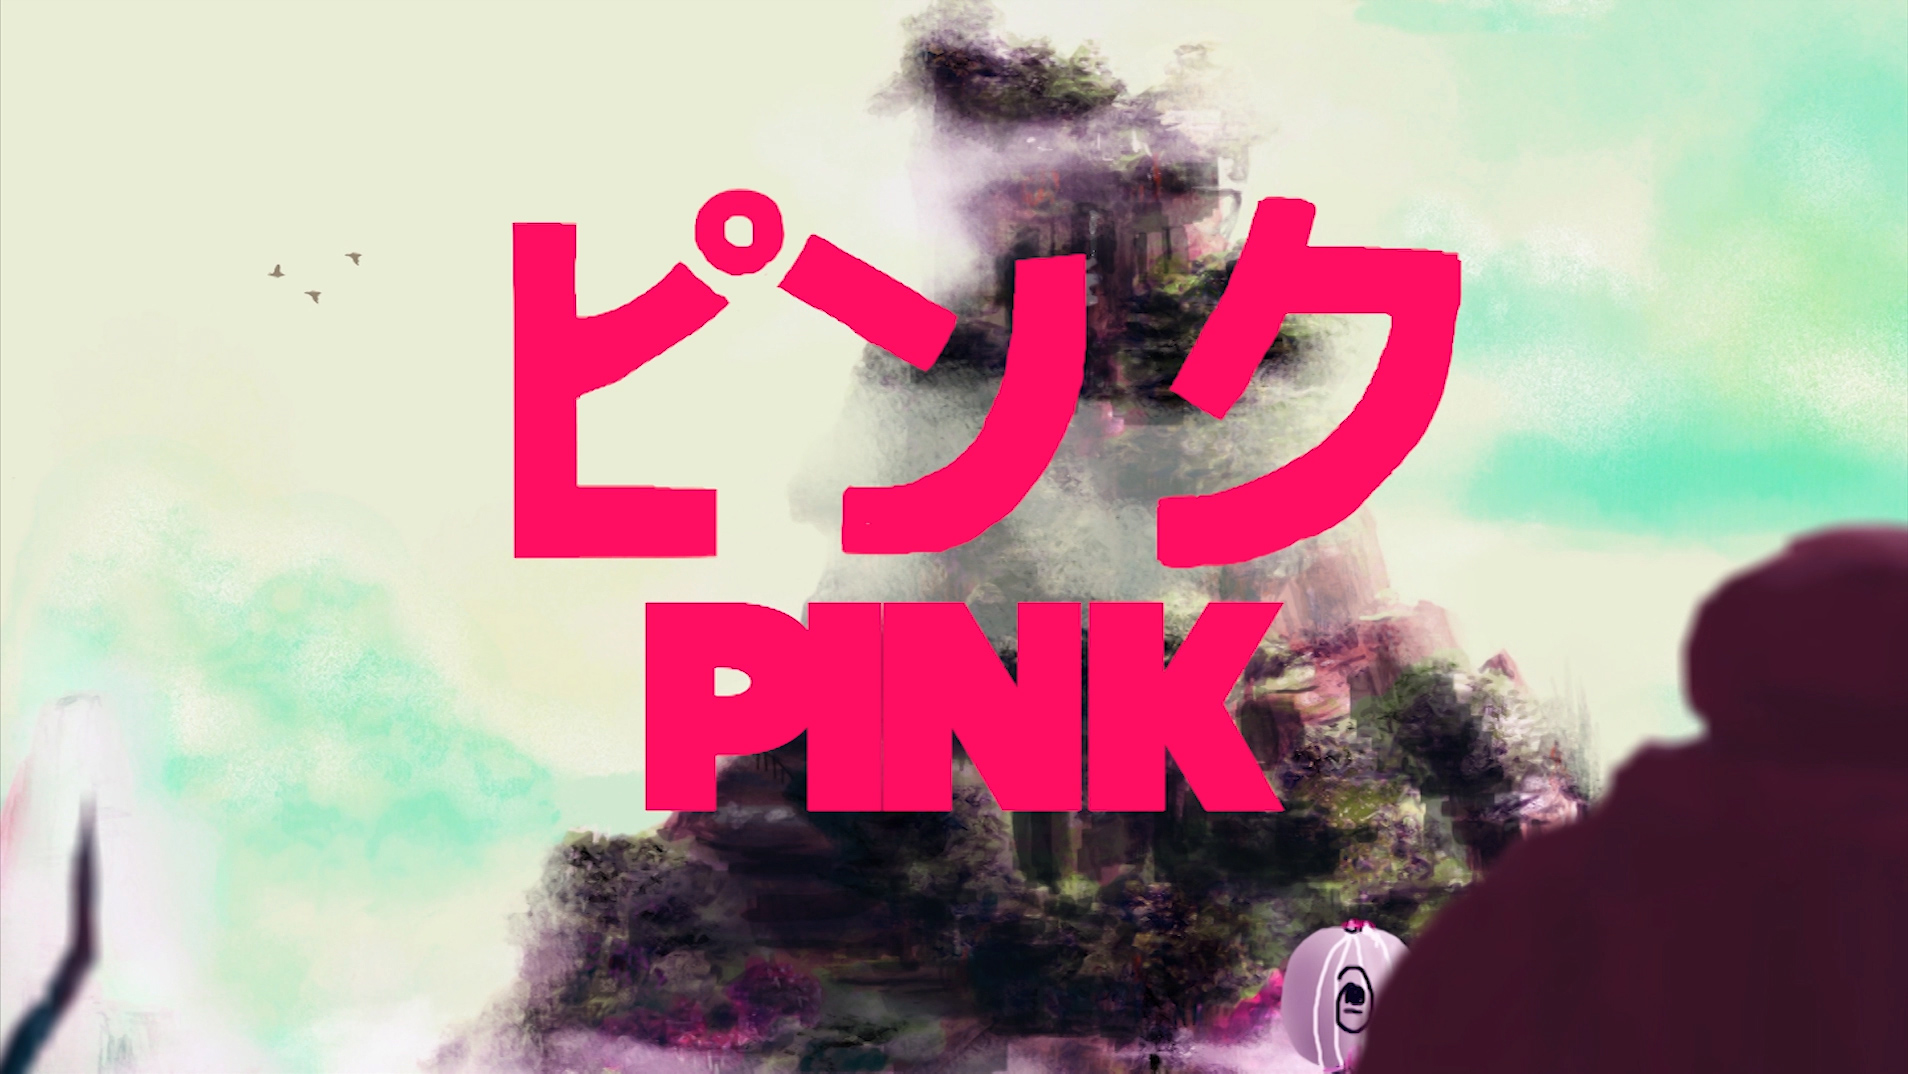 Curbside Jones - "Pink: The Animation" (Video)